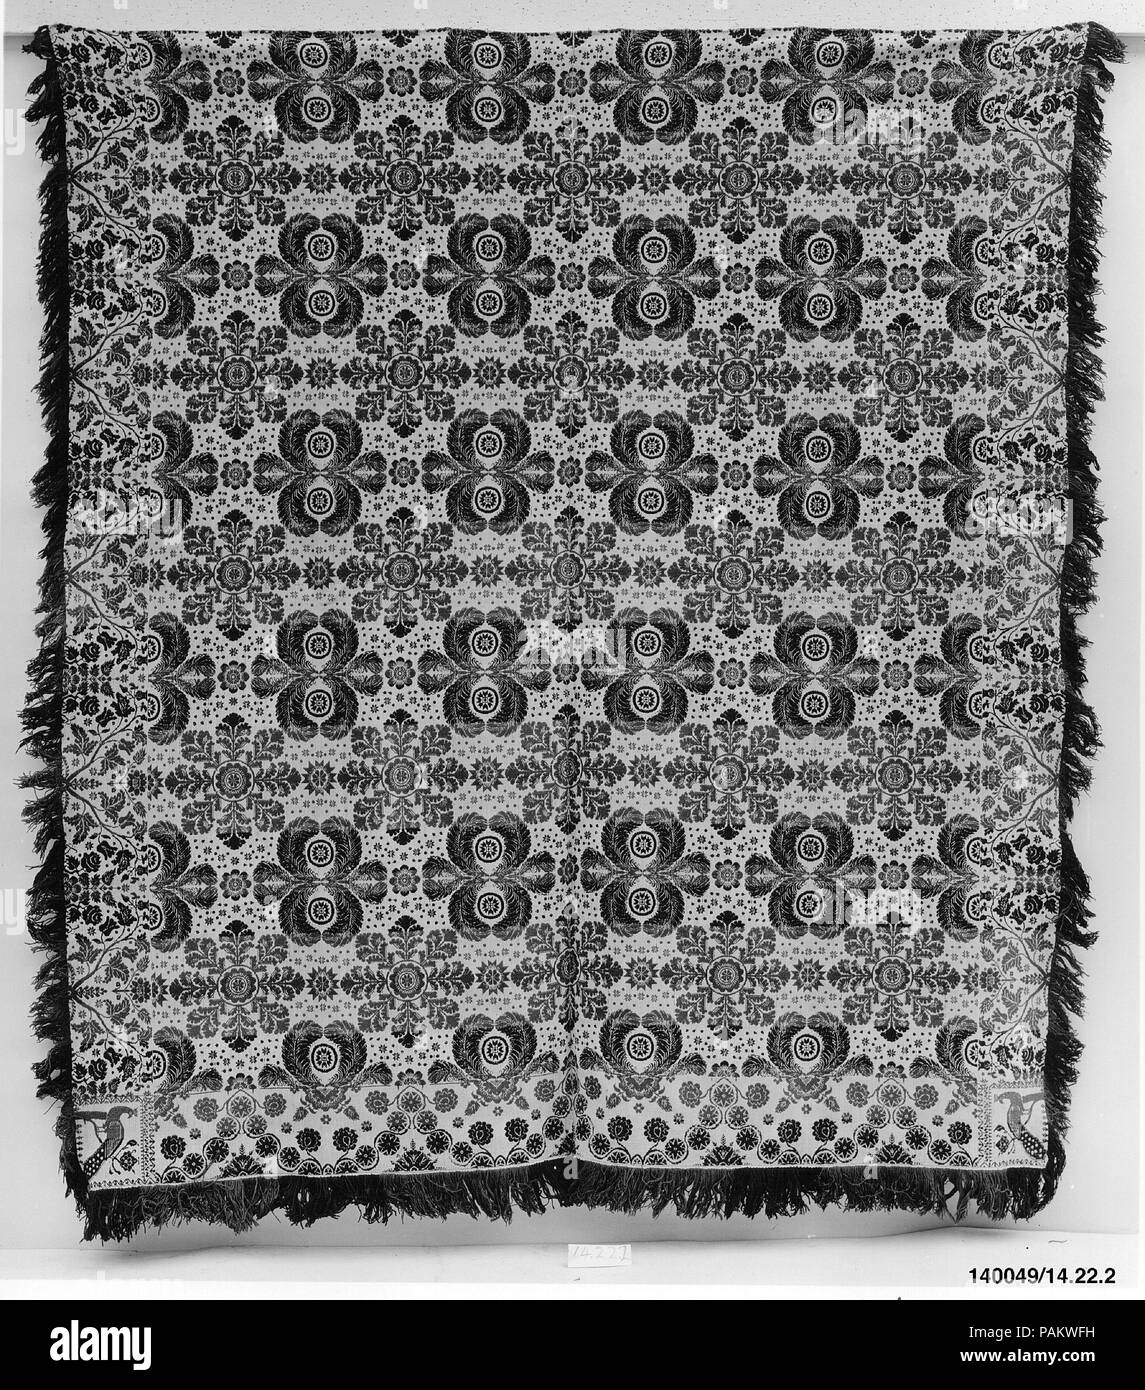 Coverlet. Culture: American. Dimensions: 98 1/2 x 89 3/4 in. (250.2 x 228 cm). Date: ca. 1840.  This coverlet is woven in two panels and seamed at the center. It has a warp of undyed and light blue cotton and a weft of dark blue, green, and red wool and undyed cotton. The central field shows feather medallions alternating with foliate medallions. The bottom border has a stylized vine motif, and the right and left borders have roses and tulips. Peacocks adorn each of the two corner blocks. Both sides of the coverlet have natural fringe, and there is attached fringe along the bottom edge. Museum Stock Photo